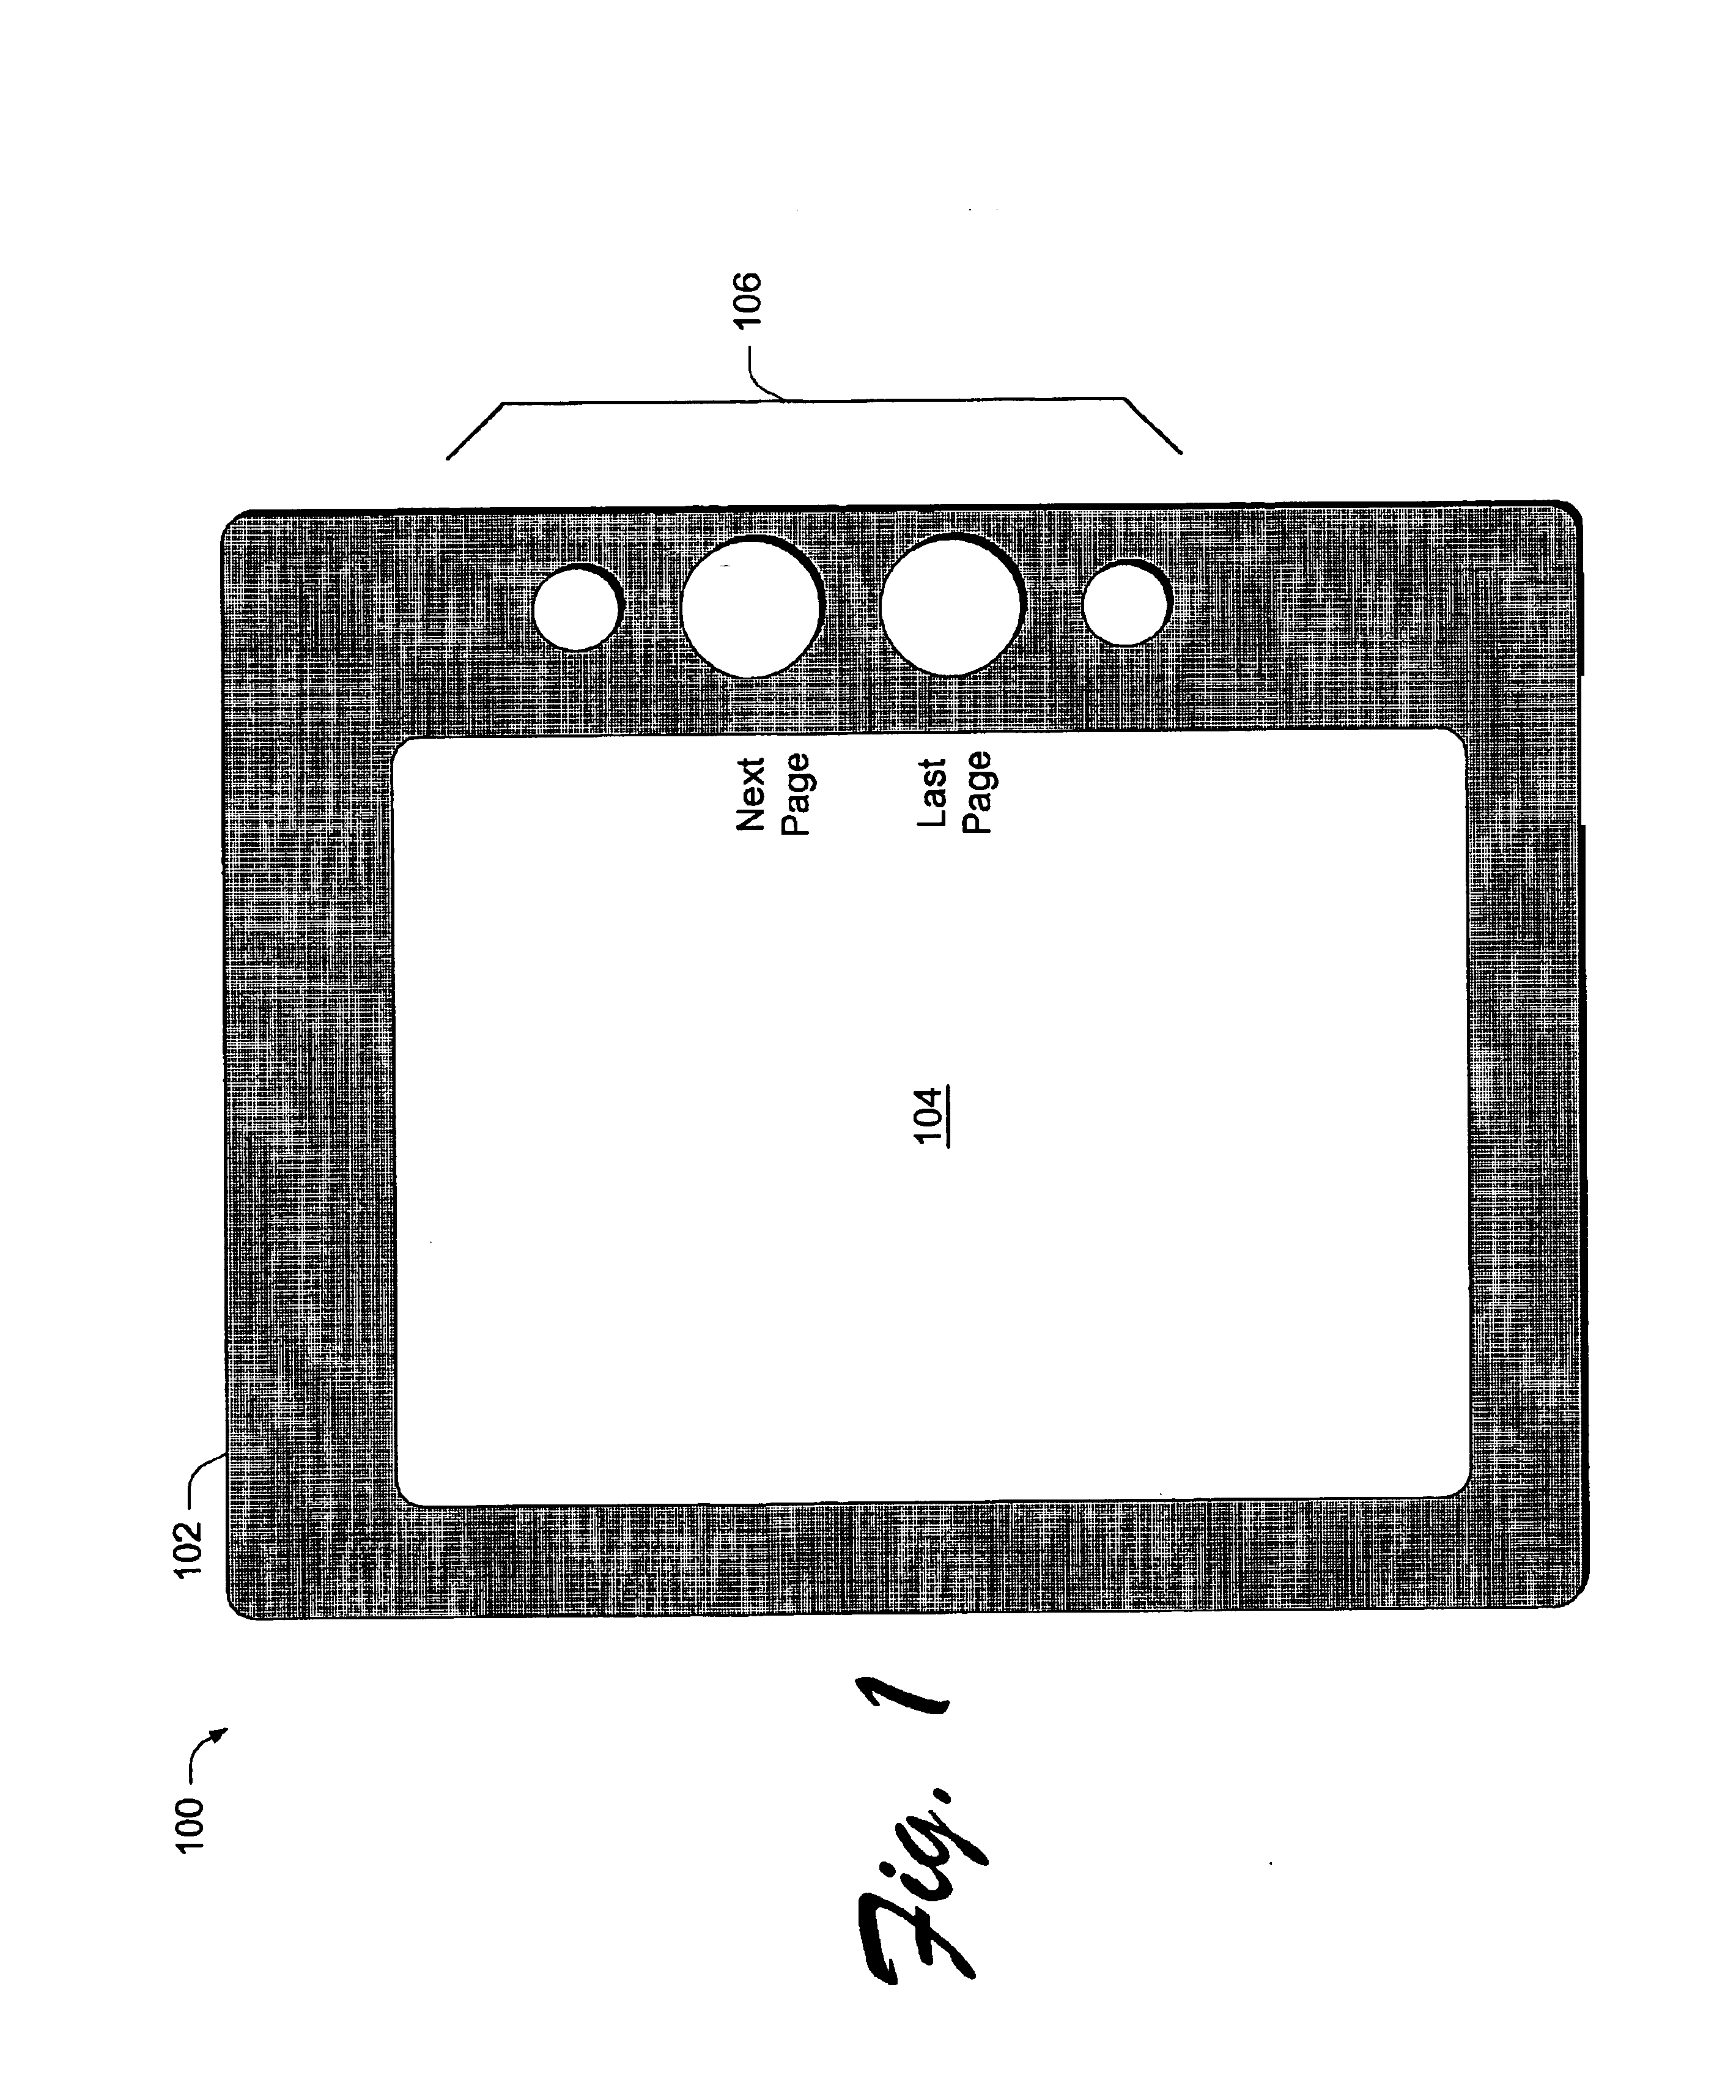 Electronic display devices and methods